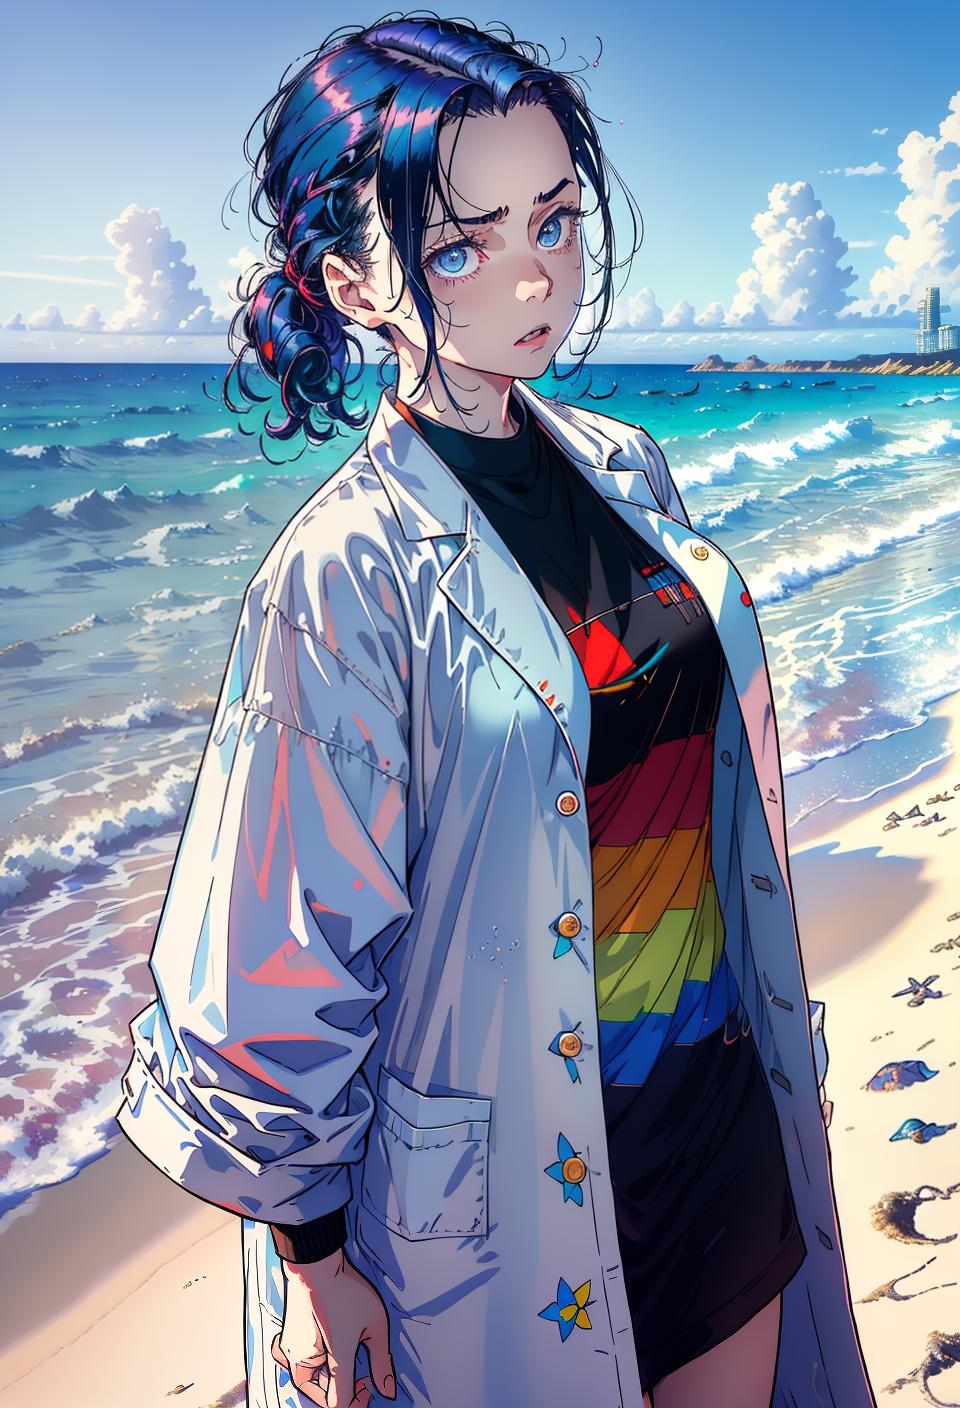  ((trending, highres, masterpiece, cinematic shot)), 1girl, young, female lab coat, beach scene, very short straight dark blue hair, hair slicked back, large rainbow-colored eyes, calm personality, sleepy expression, very pale skin, orderly, energetic